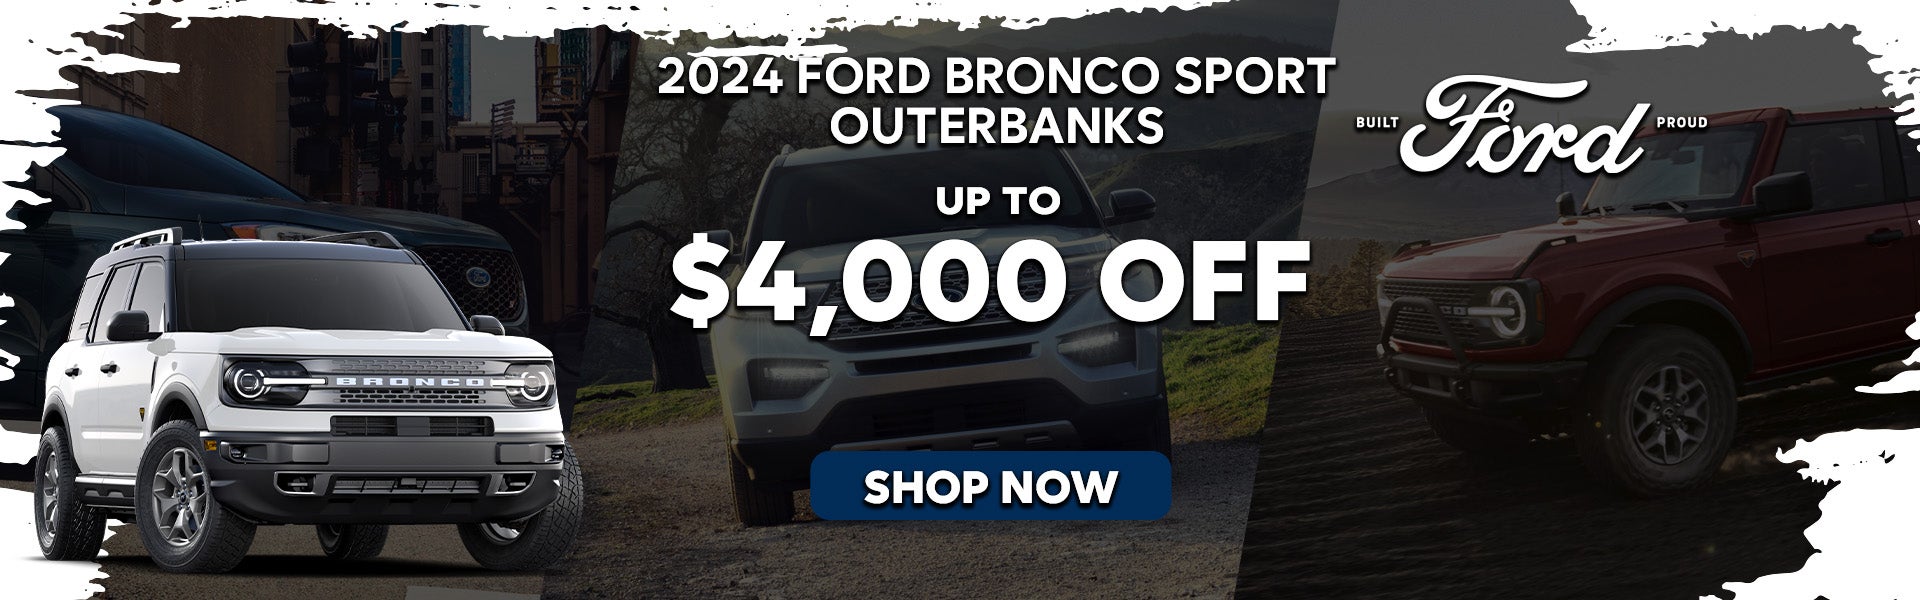 2024 Ford Bronco Sport Outerbanks Special Offer